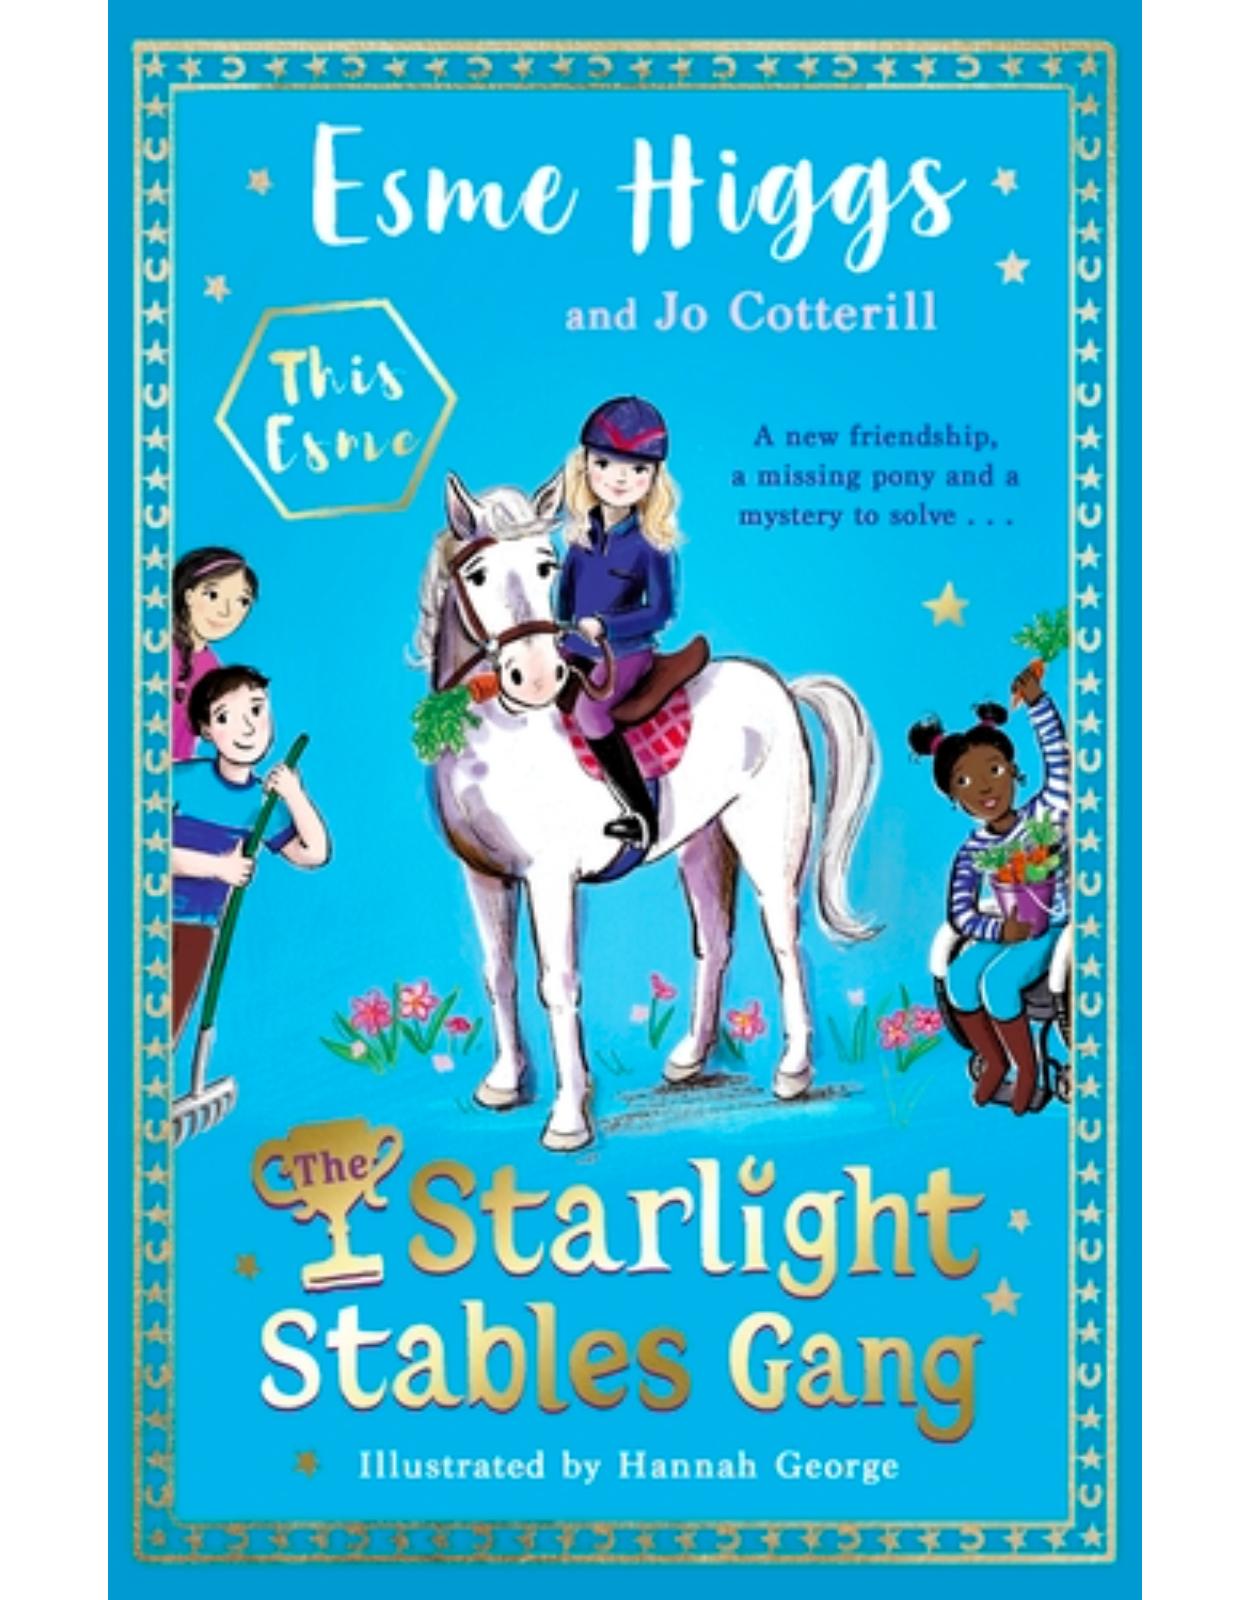 The Starlight Stables Gang